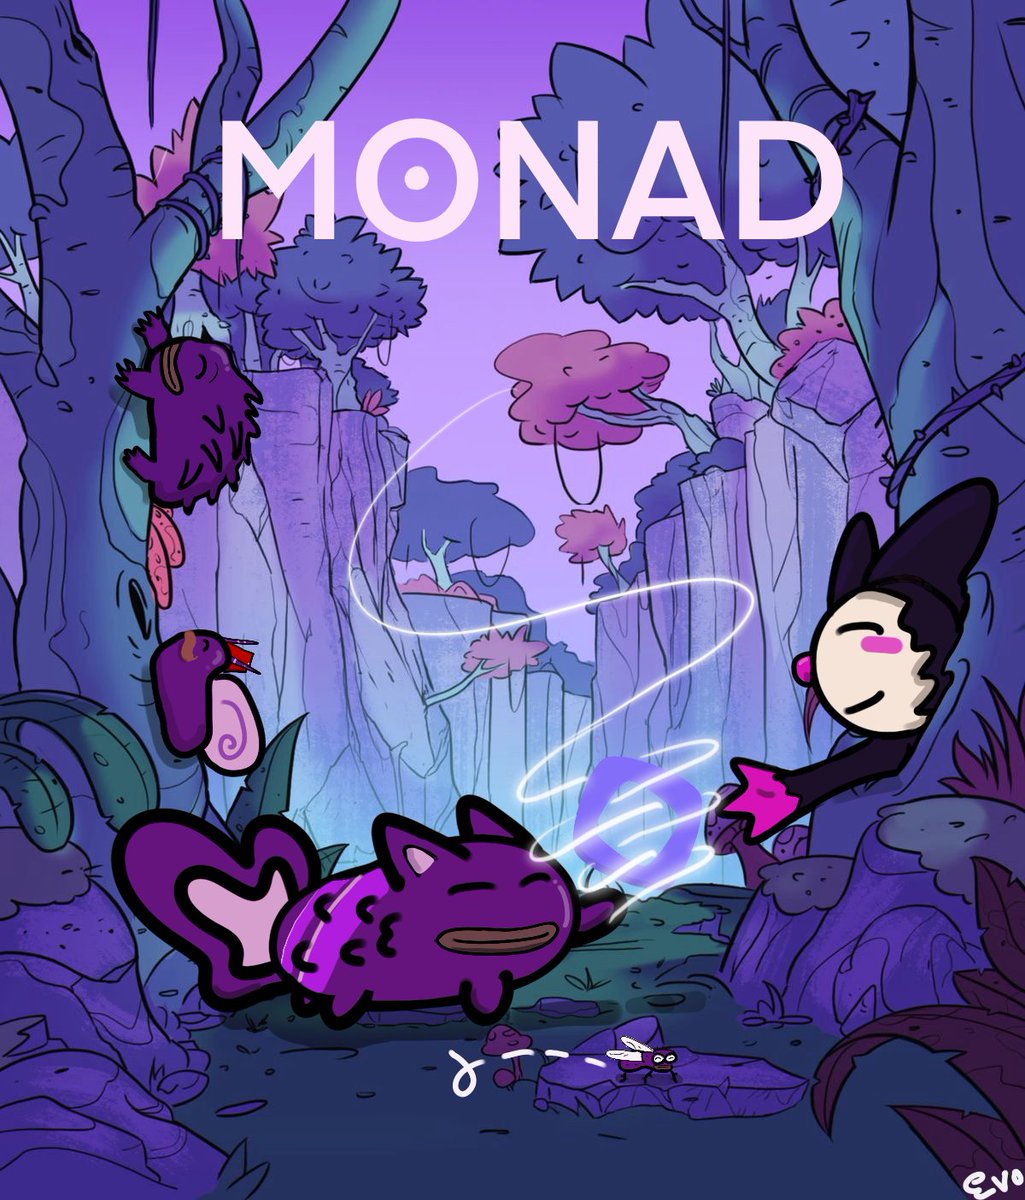 GM⨀NAD 💜 I just thinking how about MONAD community in the future!There may be some misstatements or omissions in my opinion. But this is my personal opinion. There are many things to make the monad community will be very solid and continue to grow with the philosophical